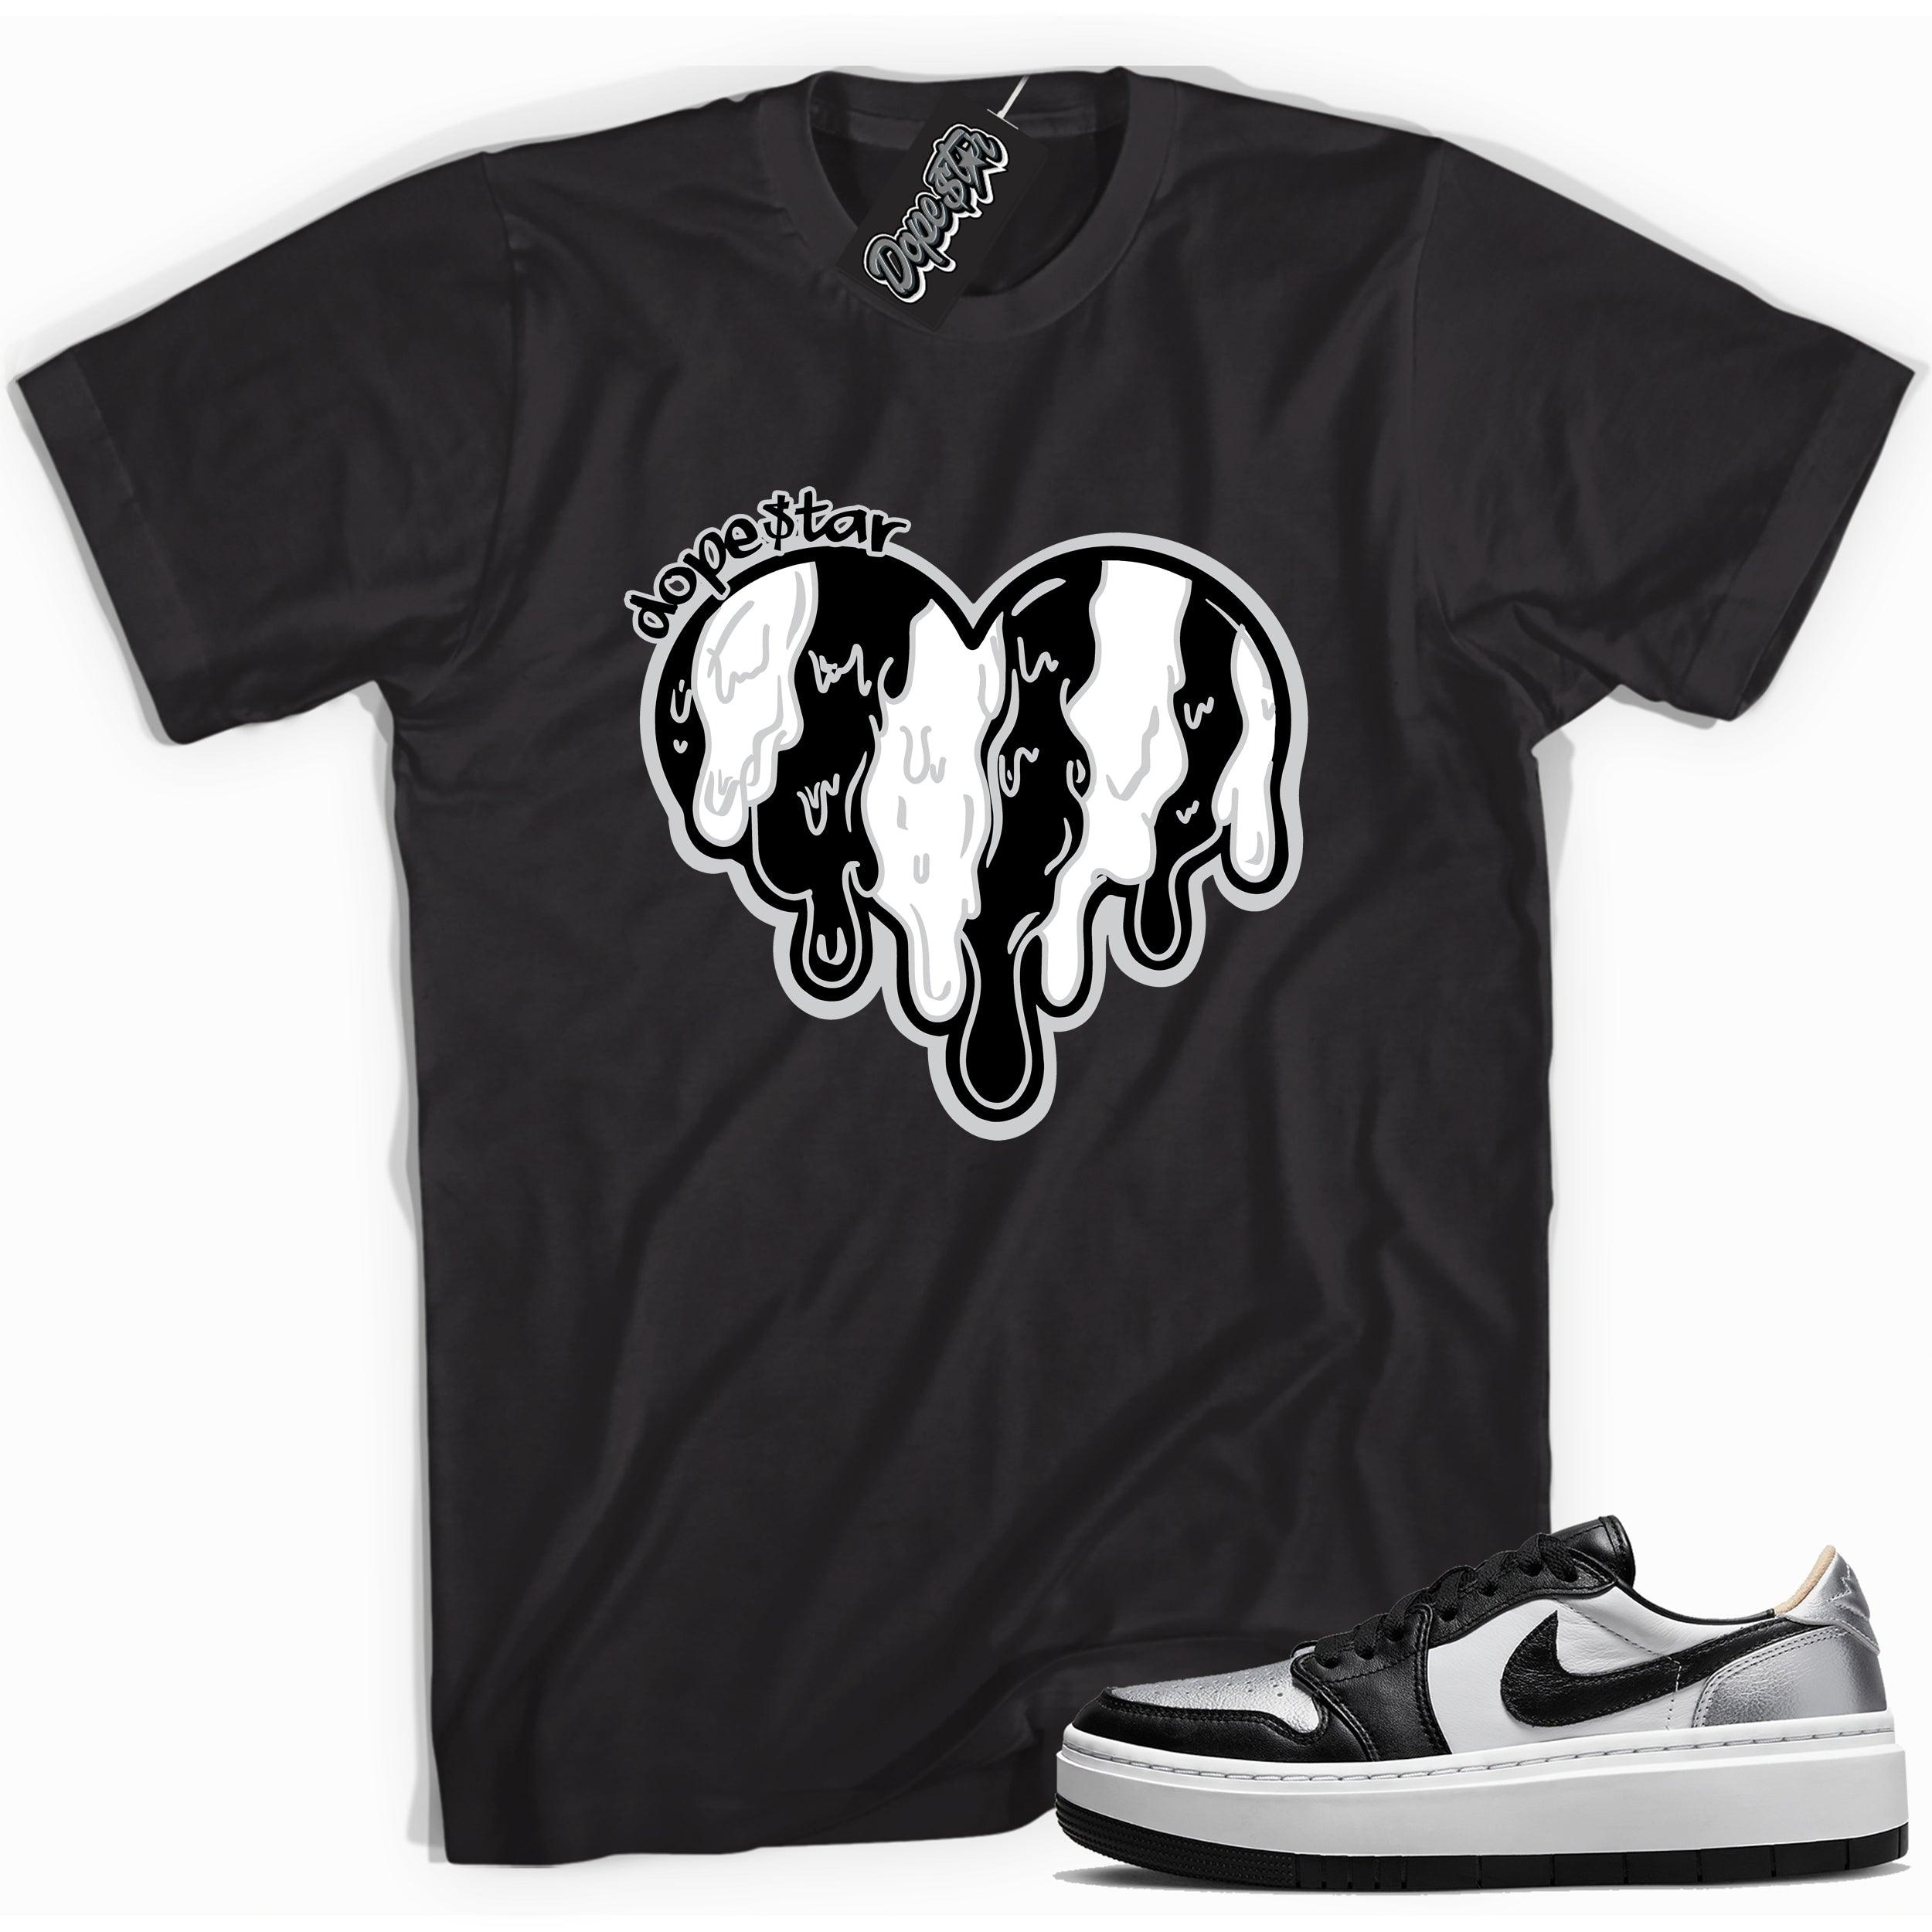 Cool black graphic tee with 'melting heart' print, that perfectly matches Air Jordan 1 Elevate Low SE Silver Toe sneakers.